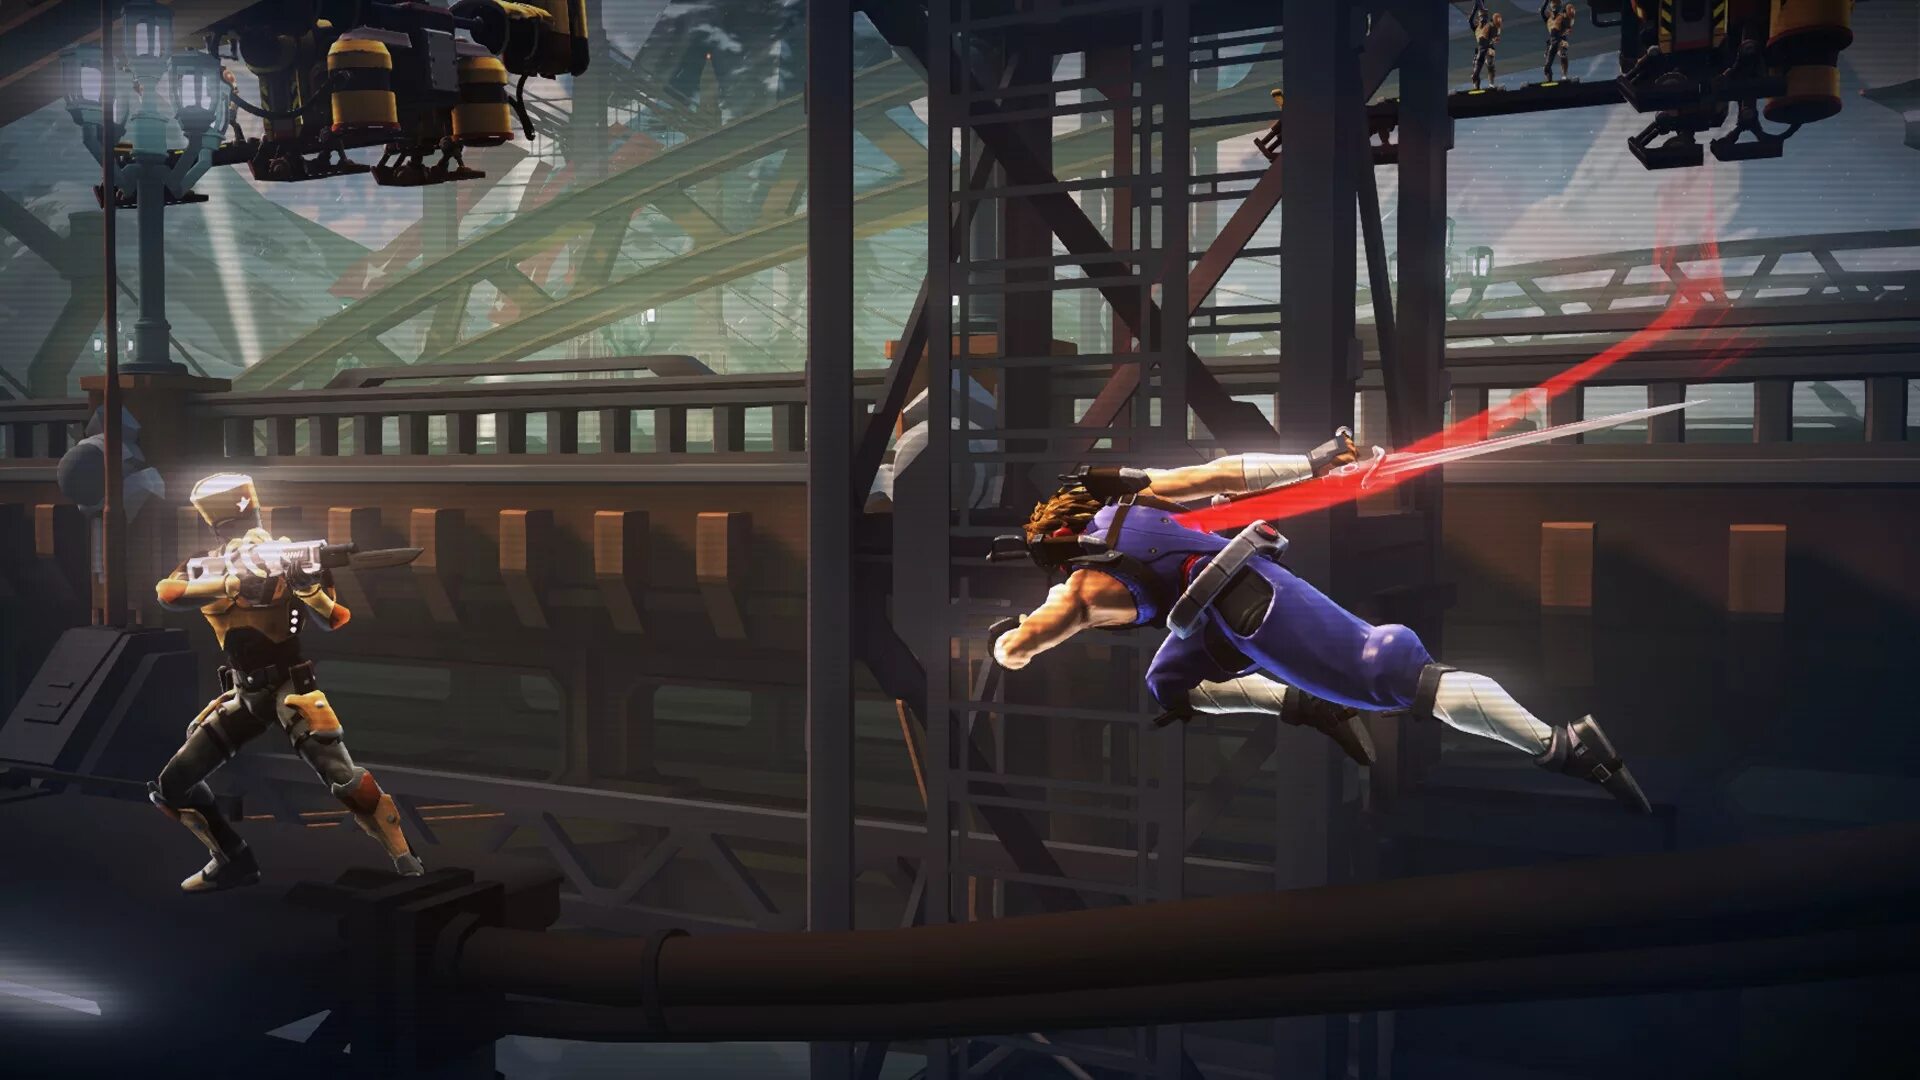 Игра Strider. Strider 2014. Strider Xbox 360. Strider (2014 Video game).